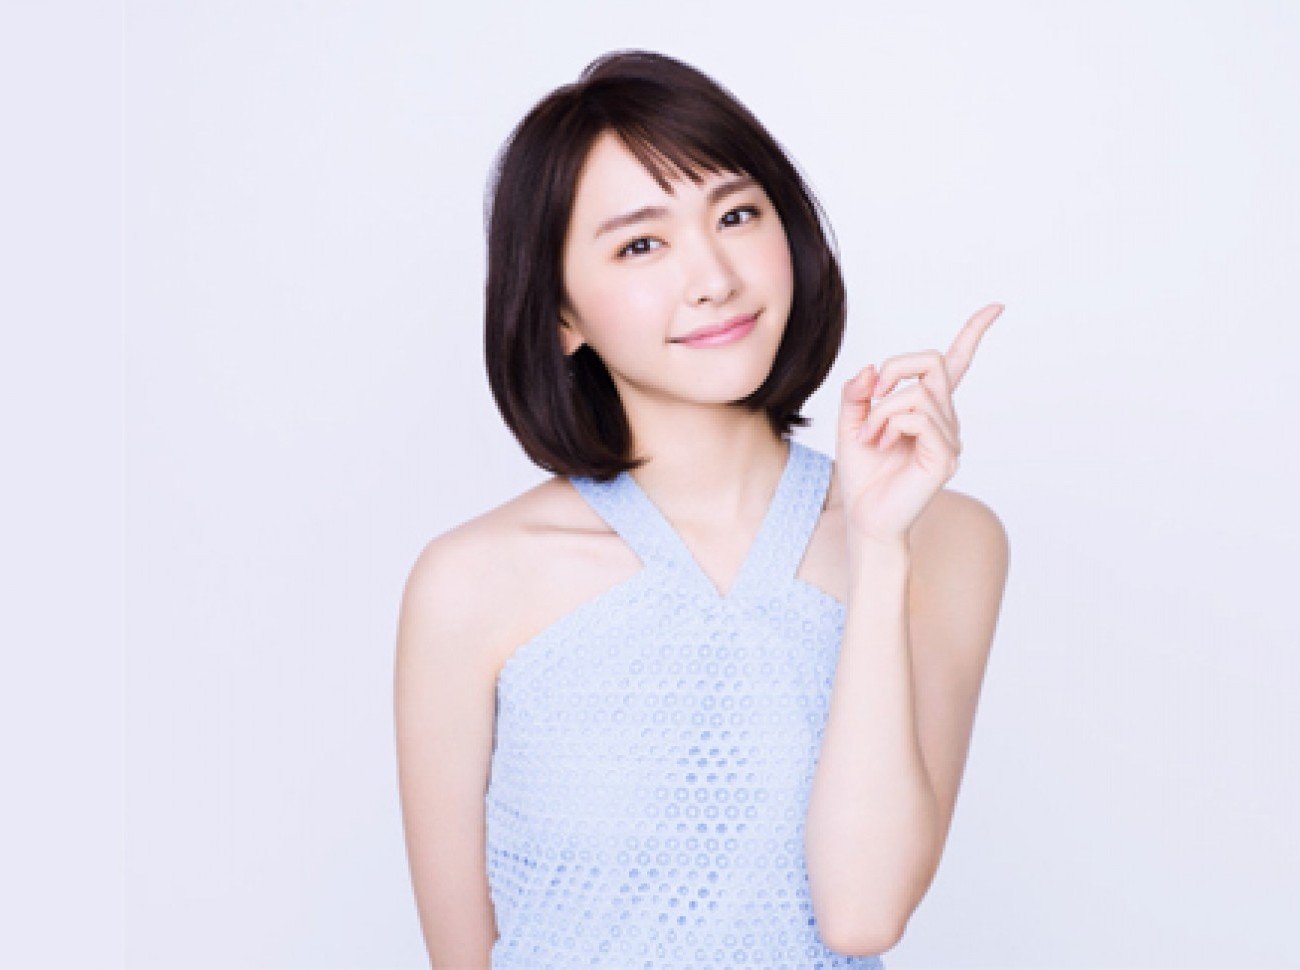 img 5a816961a714c.png?resize=1200,630 - 新垣結衣のスタイルが良すぎる！気になる2つダイエット方法を紹介！